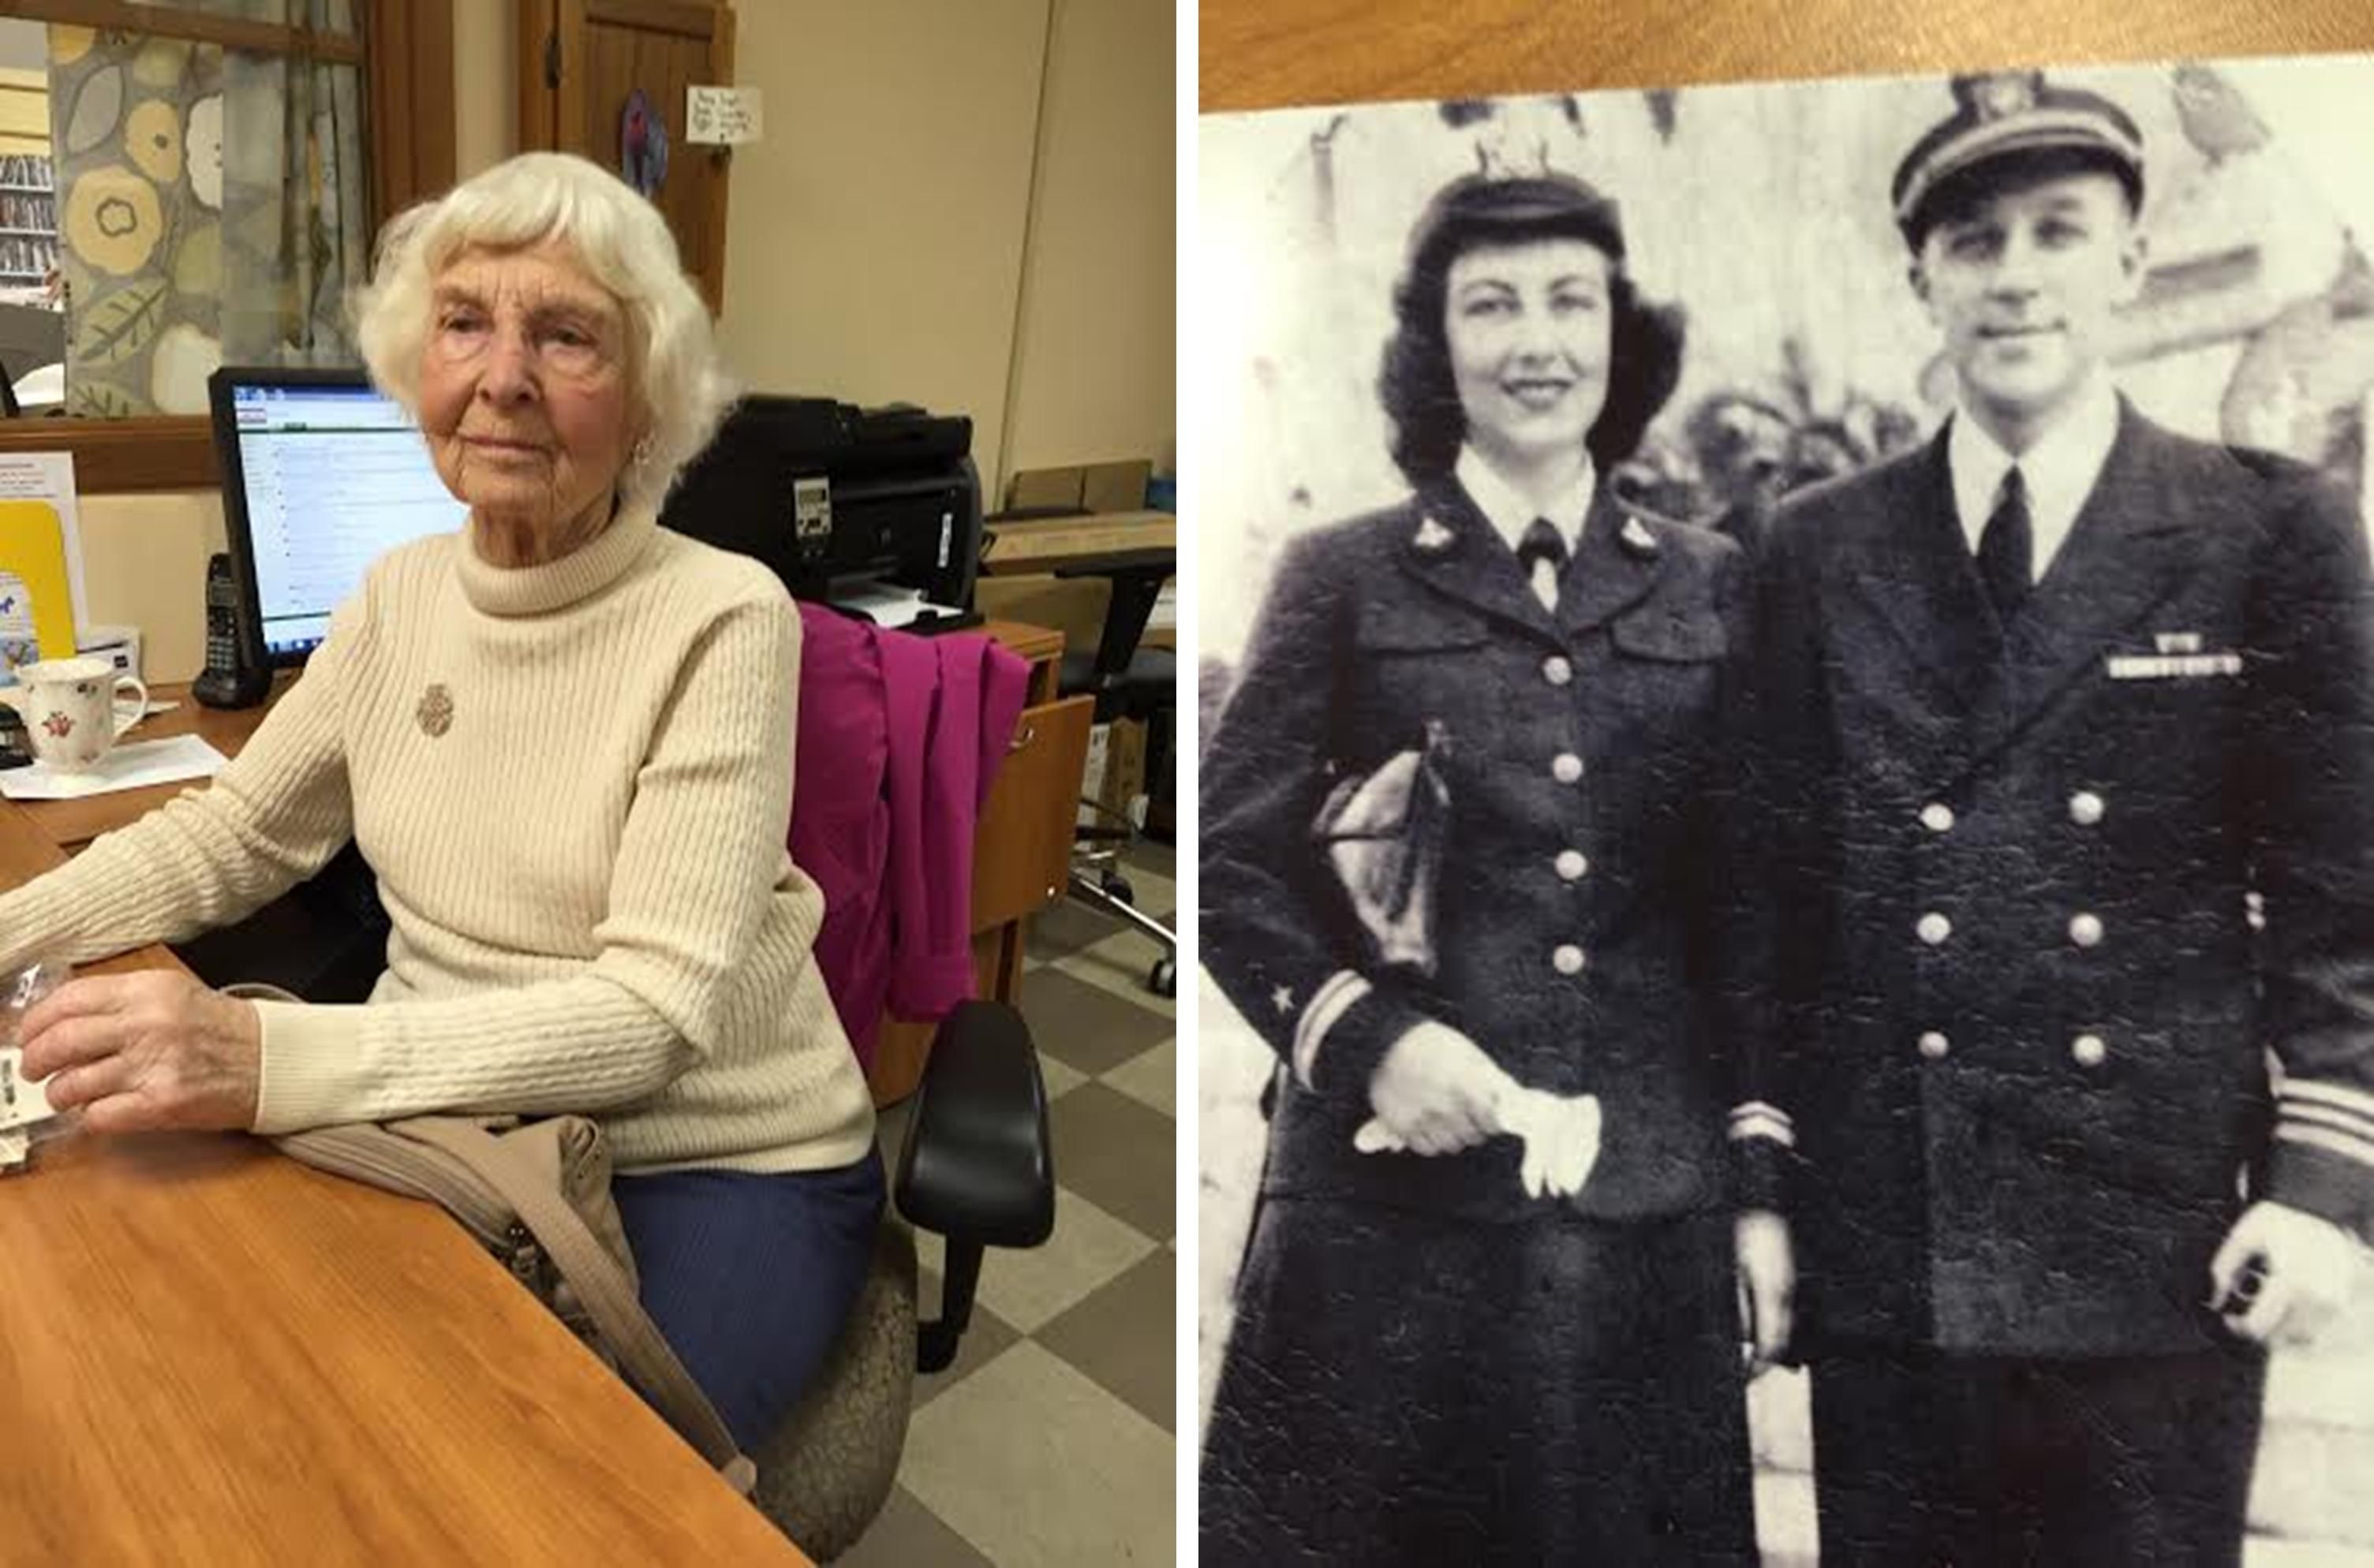 2 photographs - one of older woman in color and the other of a woman and man in military uniform in black and white